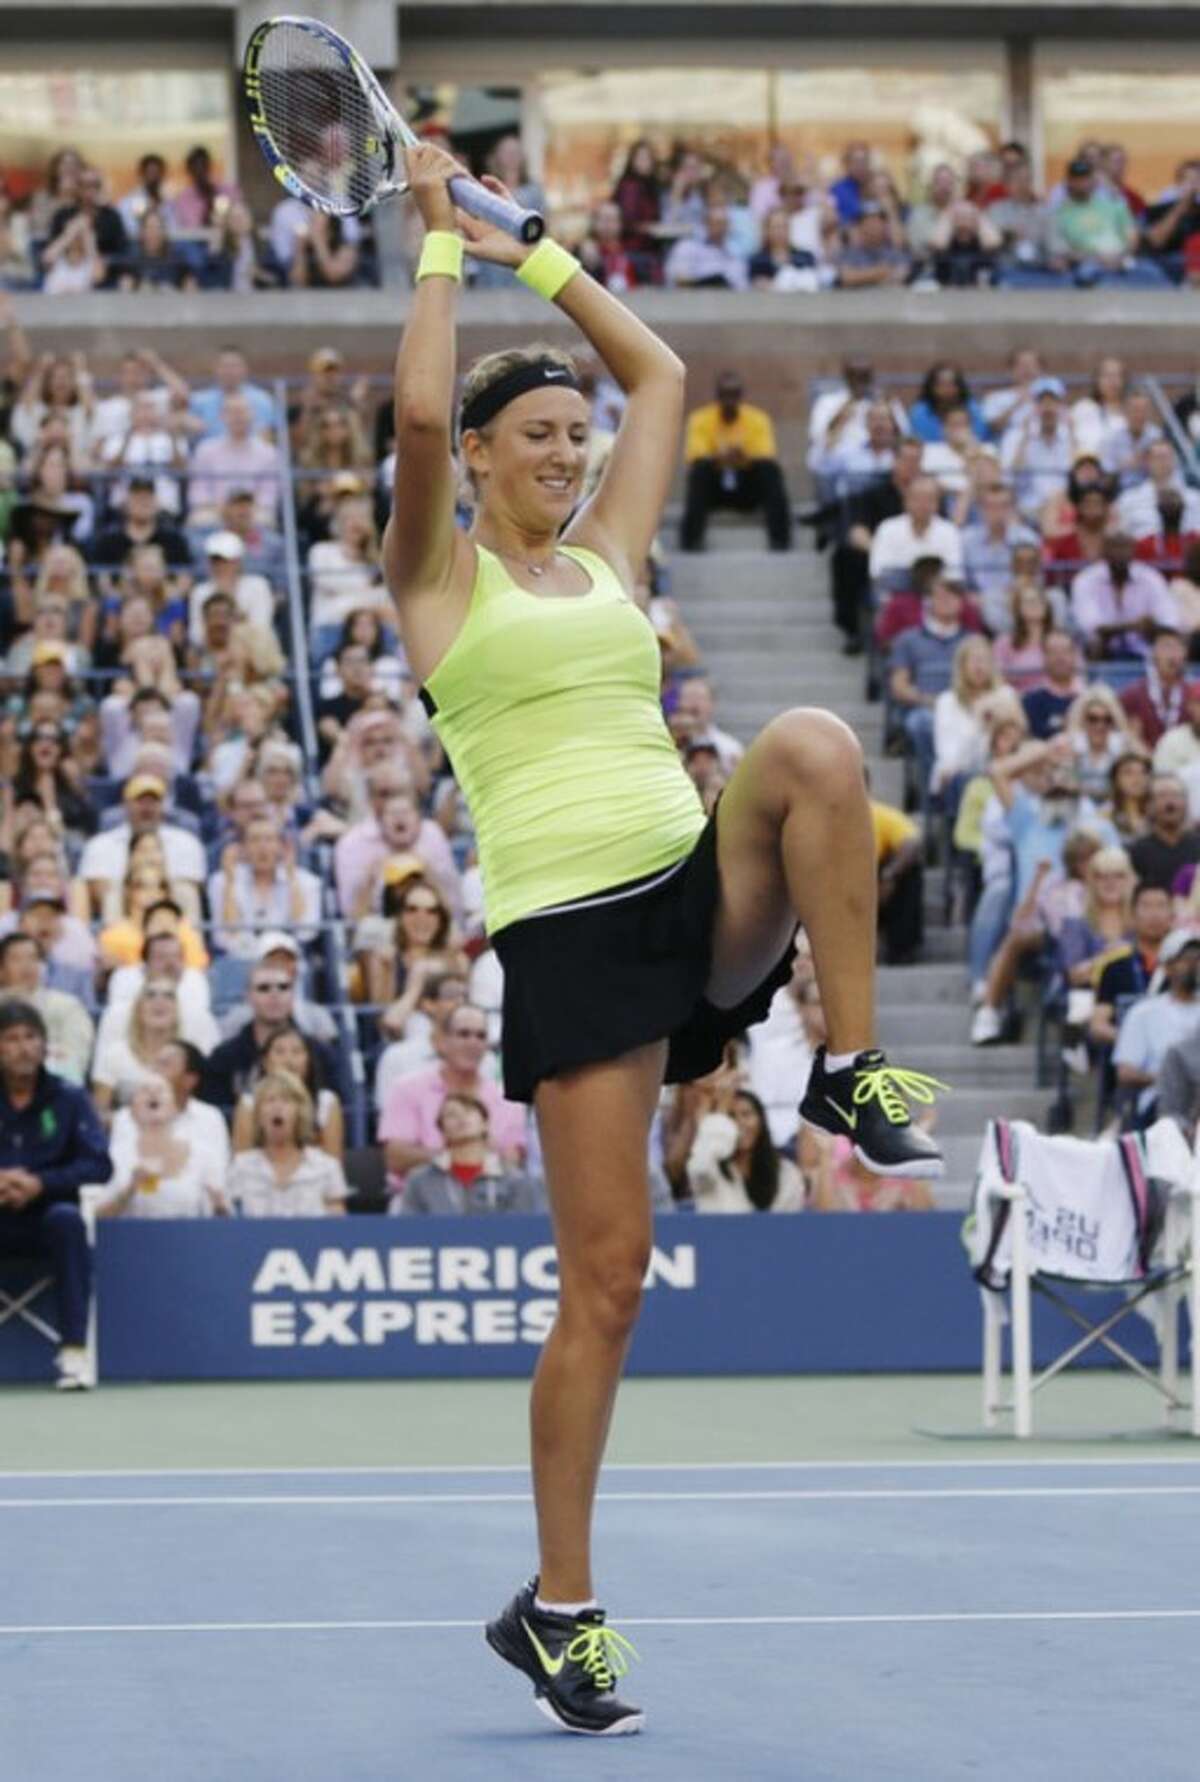 Victoria Azarenka, of Belarus, reacts while playing against Serena Williams during the championship match at the 2012 US Open tennis tournament, Sunday, Sept. 9, 2012, in New York. (AP Photo/Darron Cummings)